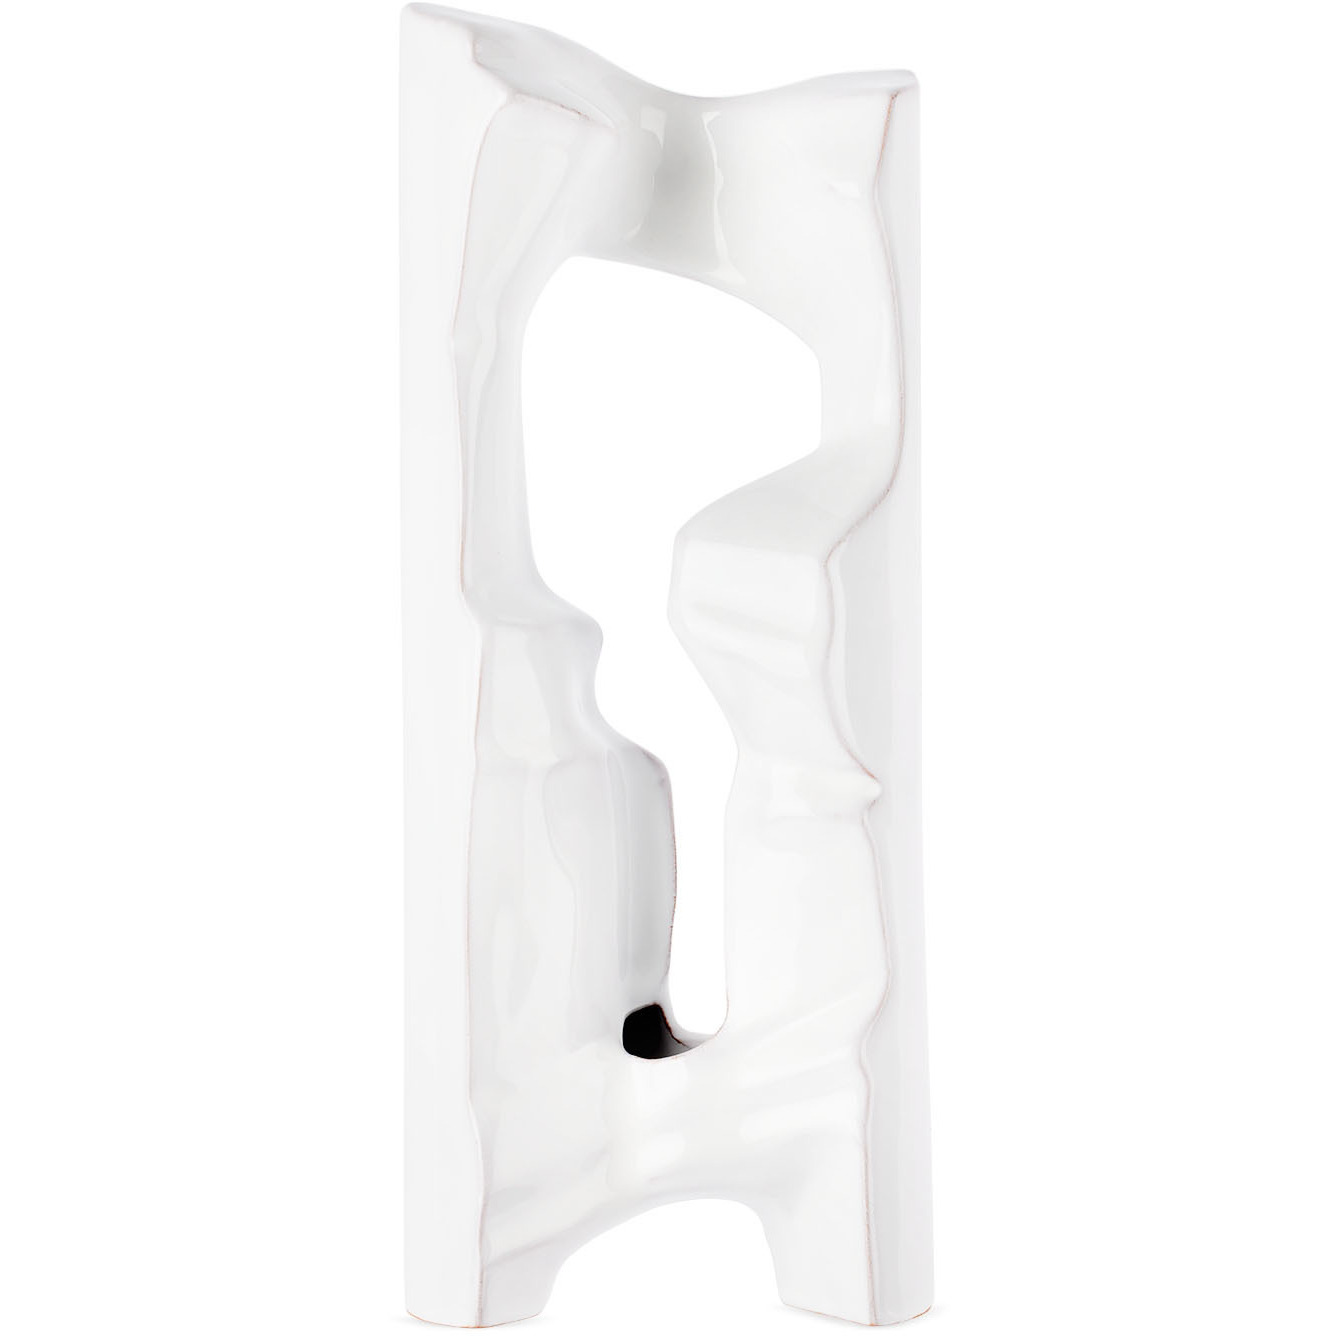 Clément Boutillon White Canyon Candle Holder - image 1